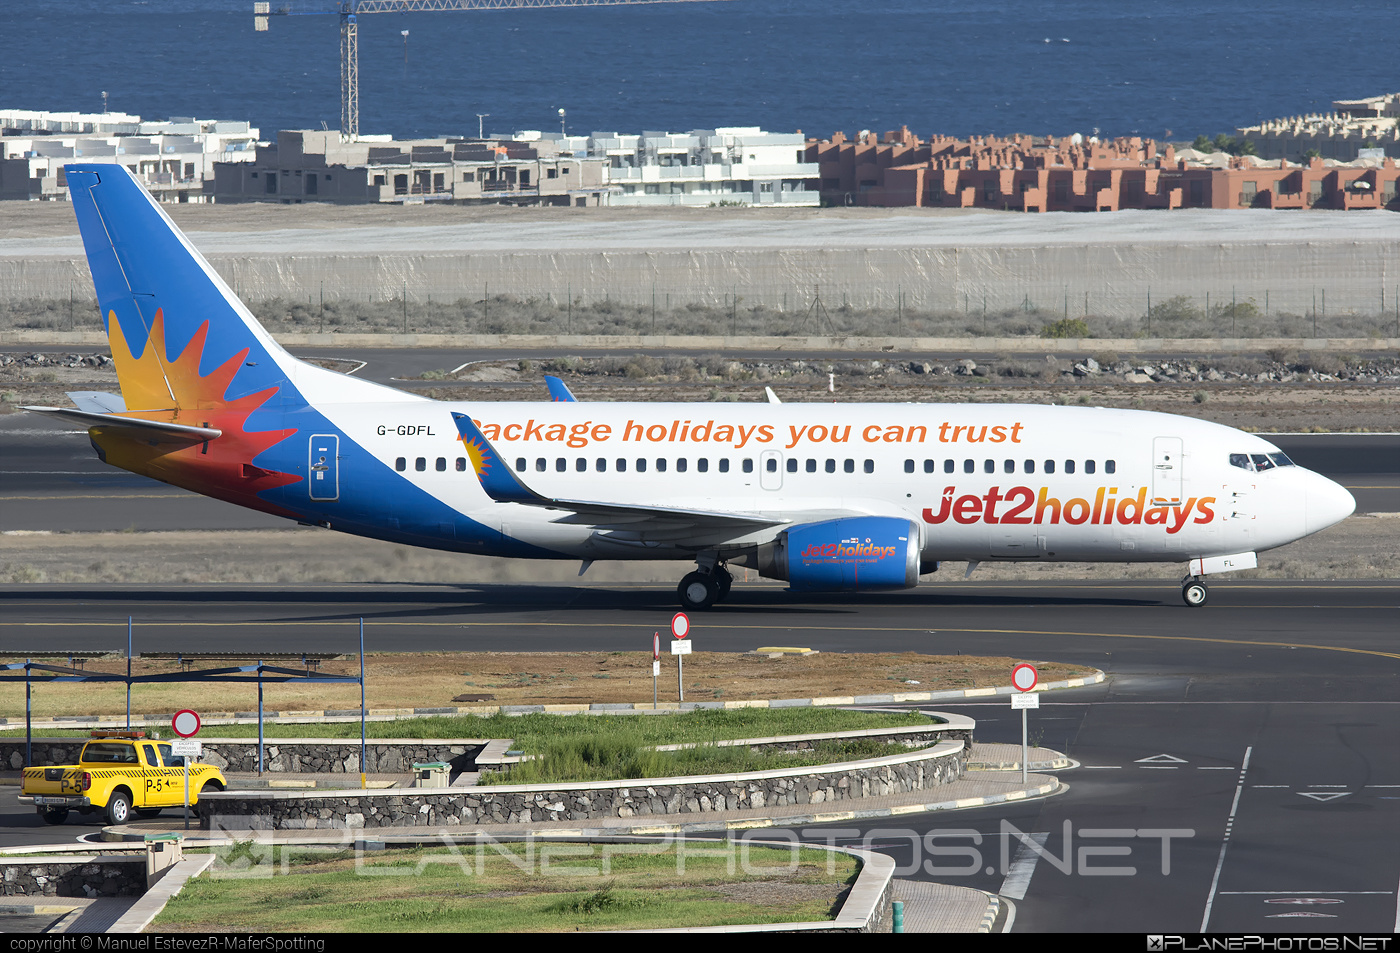 Boeing 737-300 - G-GDFL operated by Jet2holidays #b737 #boeing #boeing737 #jet2holidays